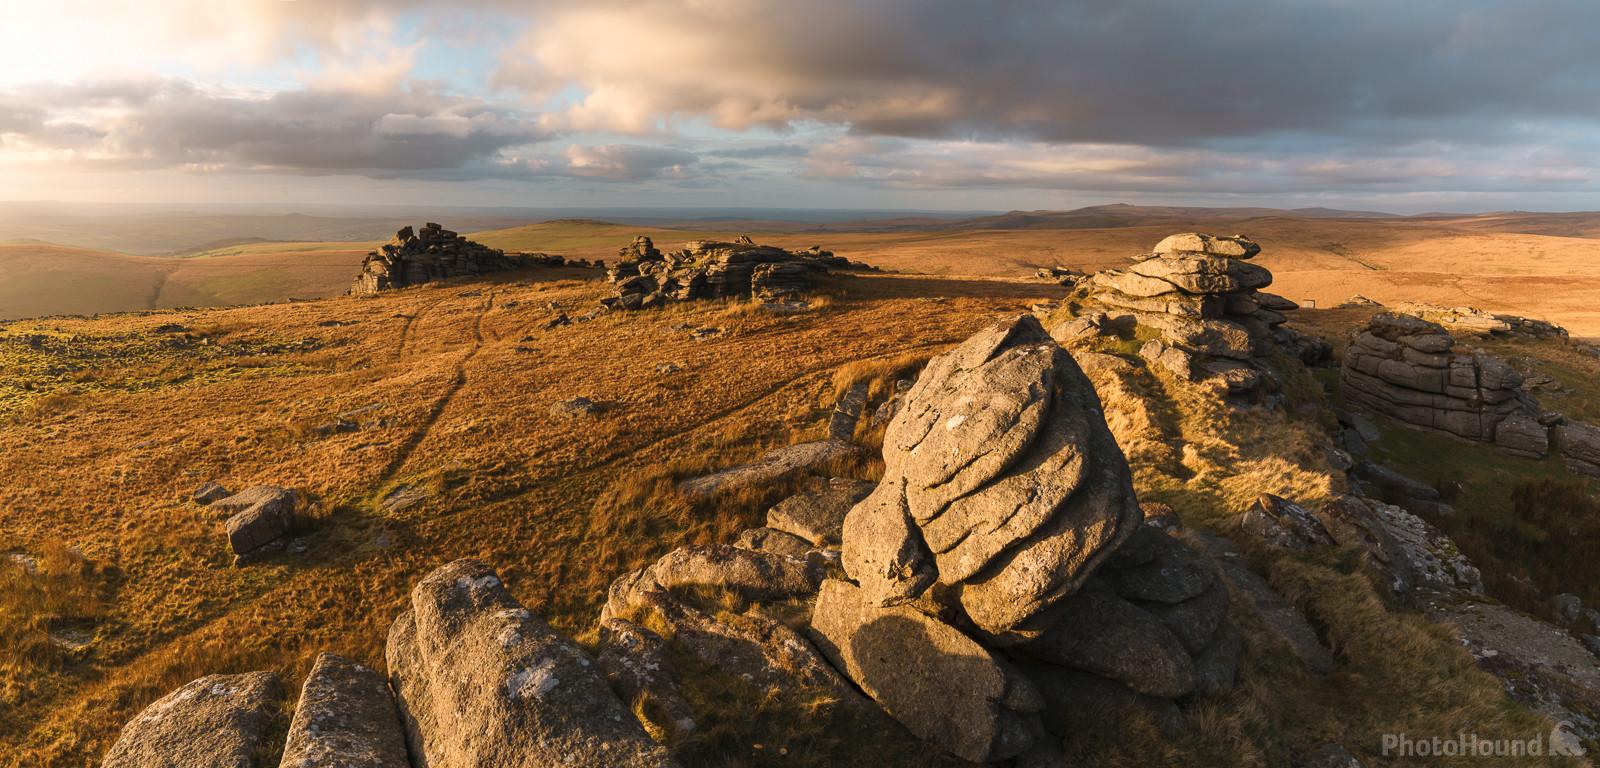 Image of Great Mis Tor by Richard Fox